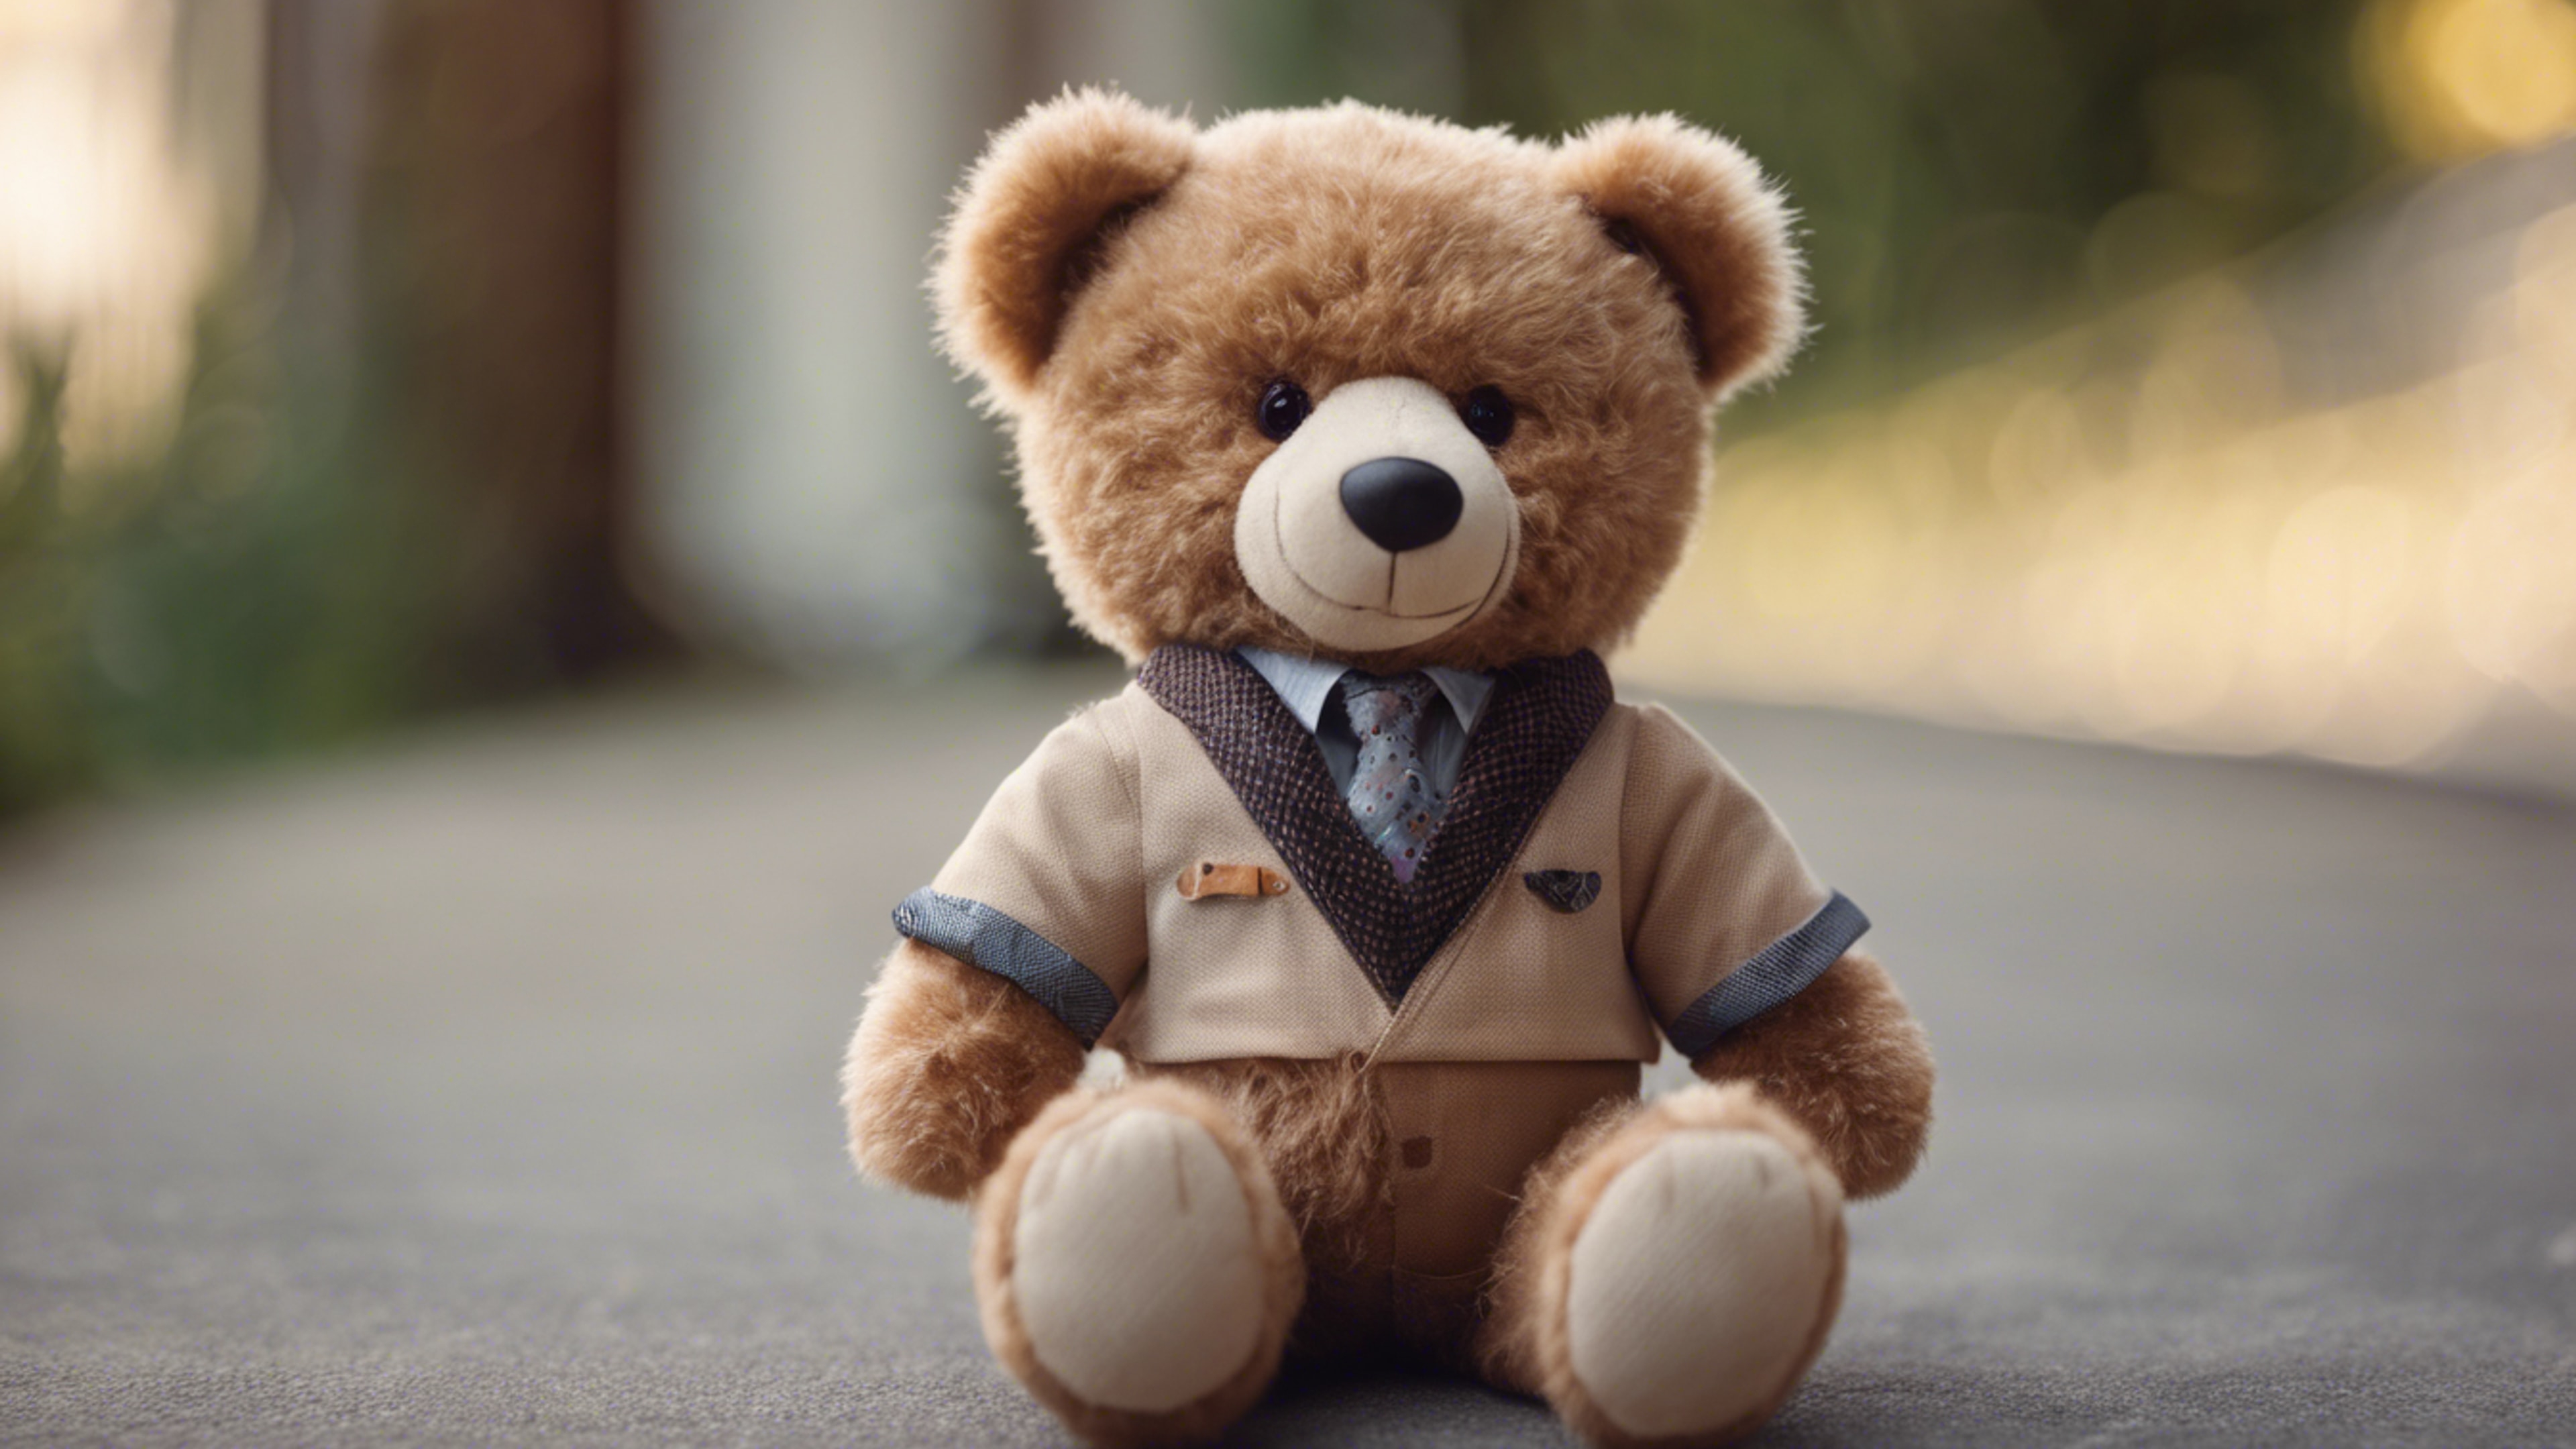 A teddy bear with light brown fur wearing a preppy outfit. วอลล์เปเปอร์[c4dfc3c378844a52a1e6]